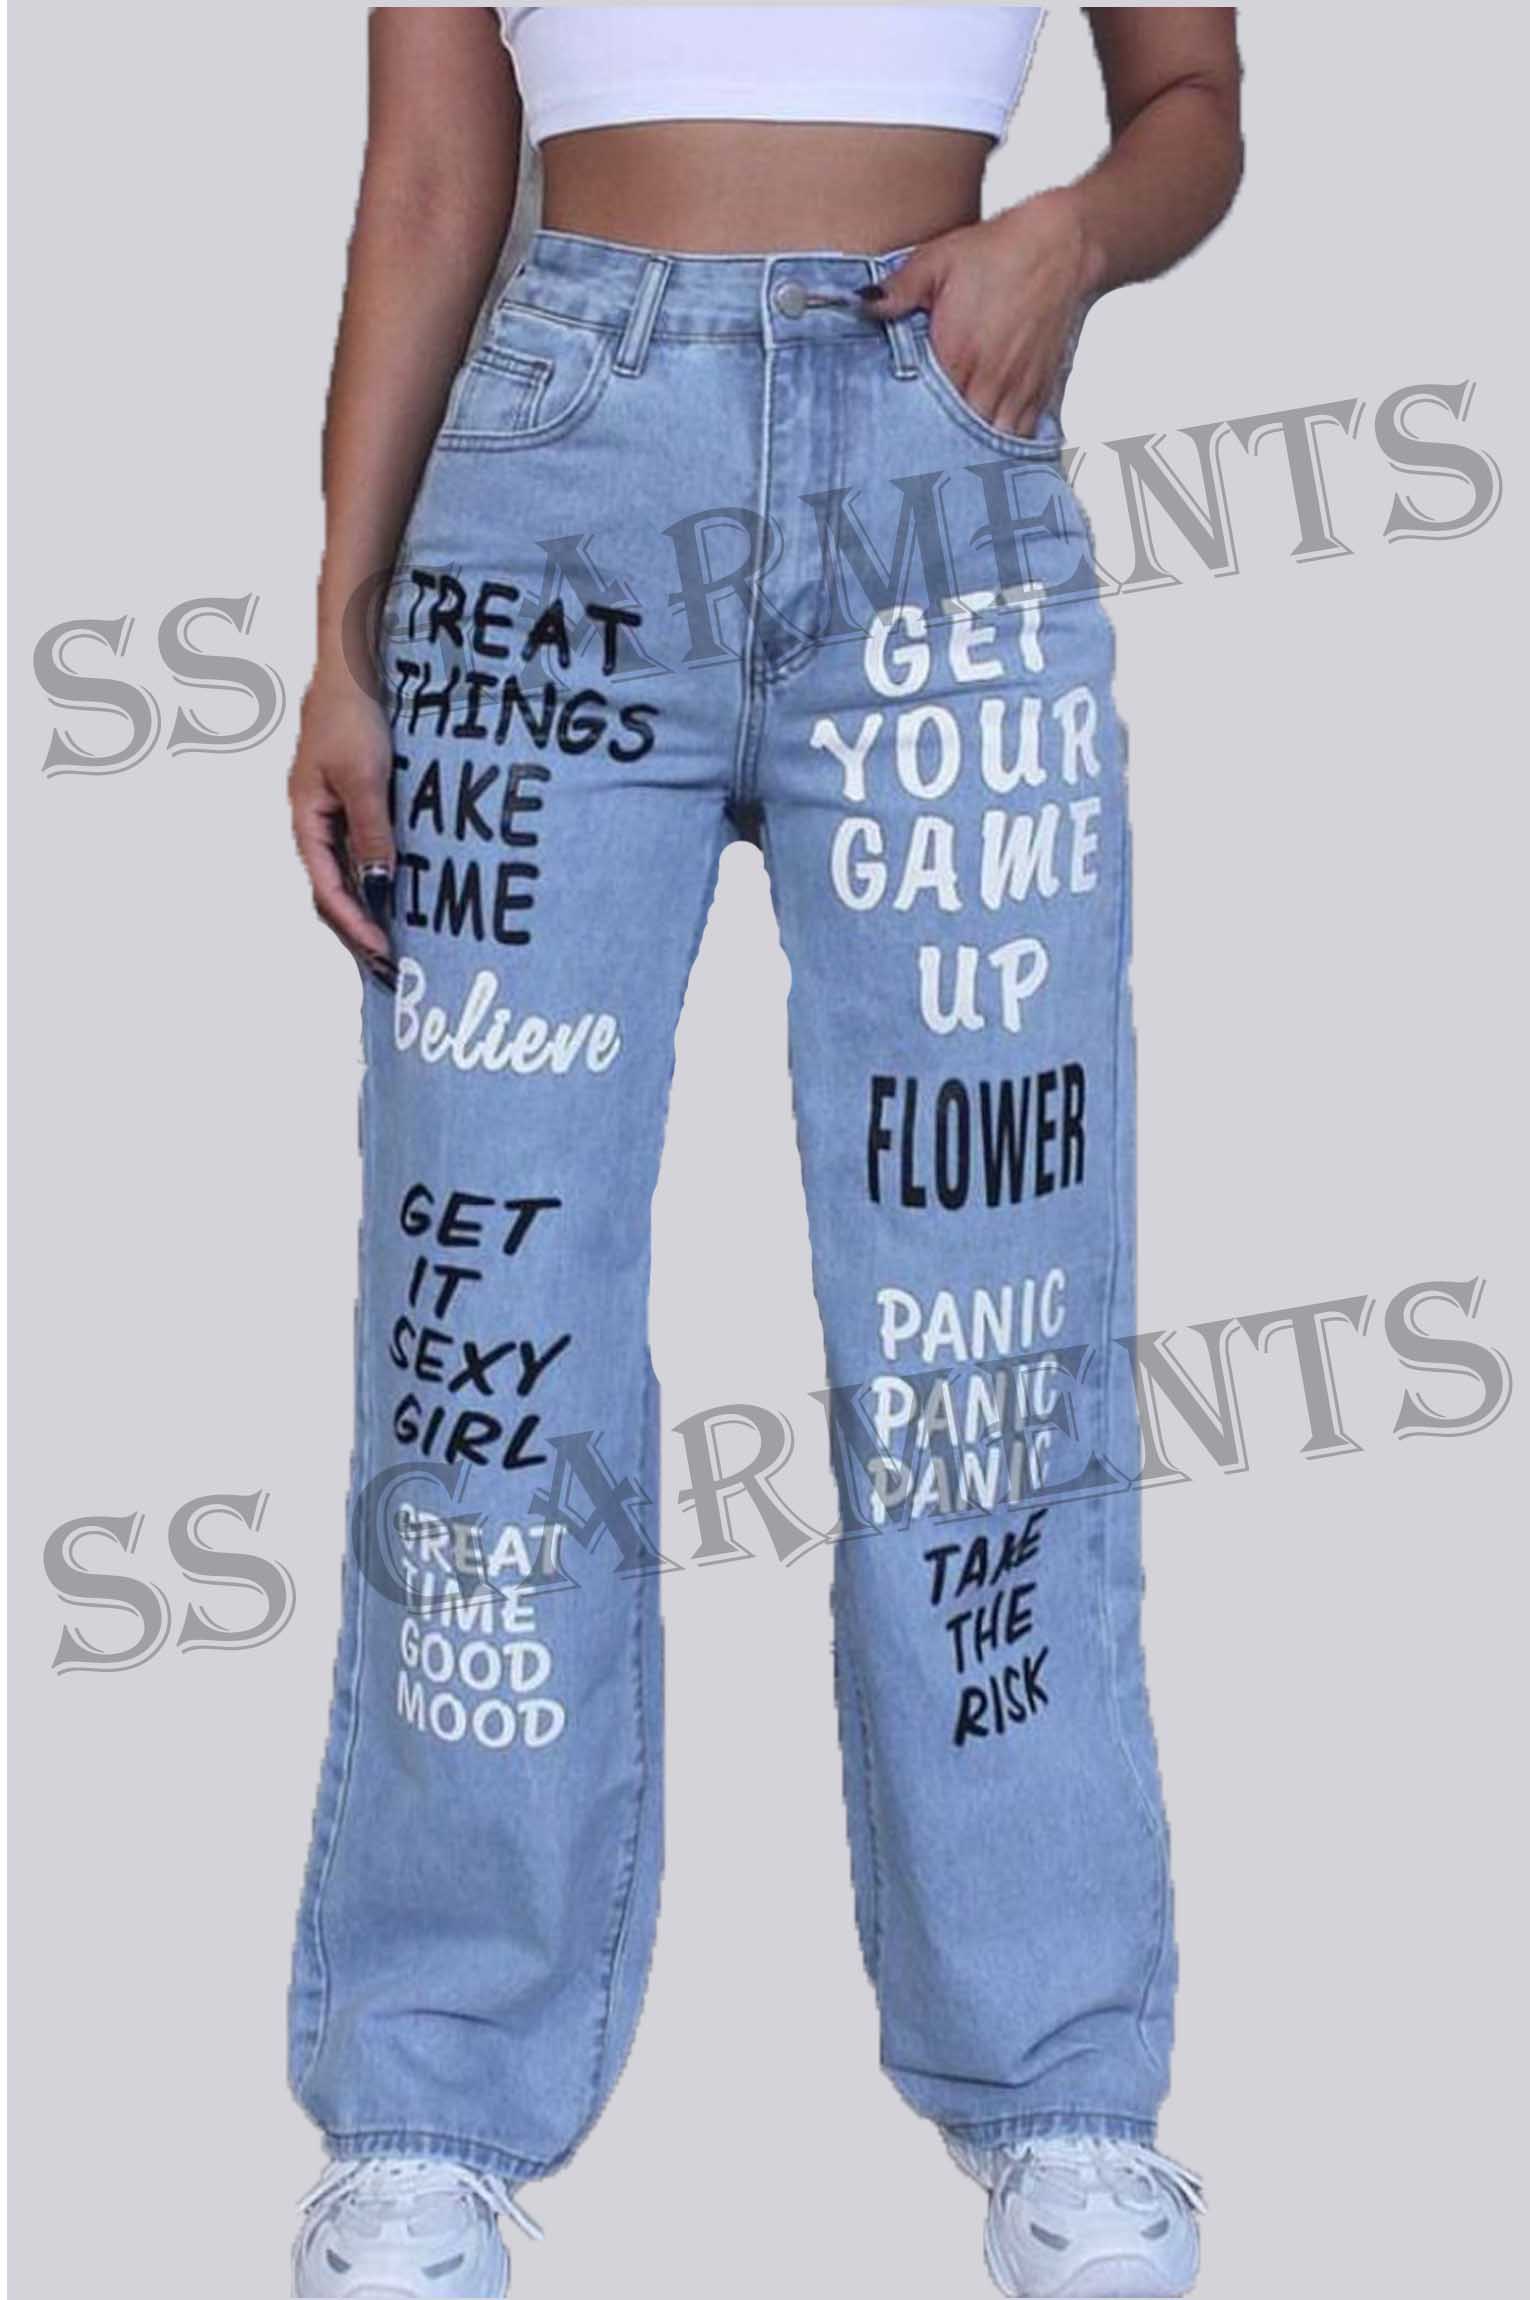 Get Your Game Onn Printed Denim Jeans with Cotton and Nylon Soft Fabric